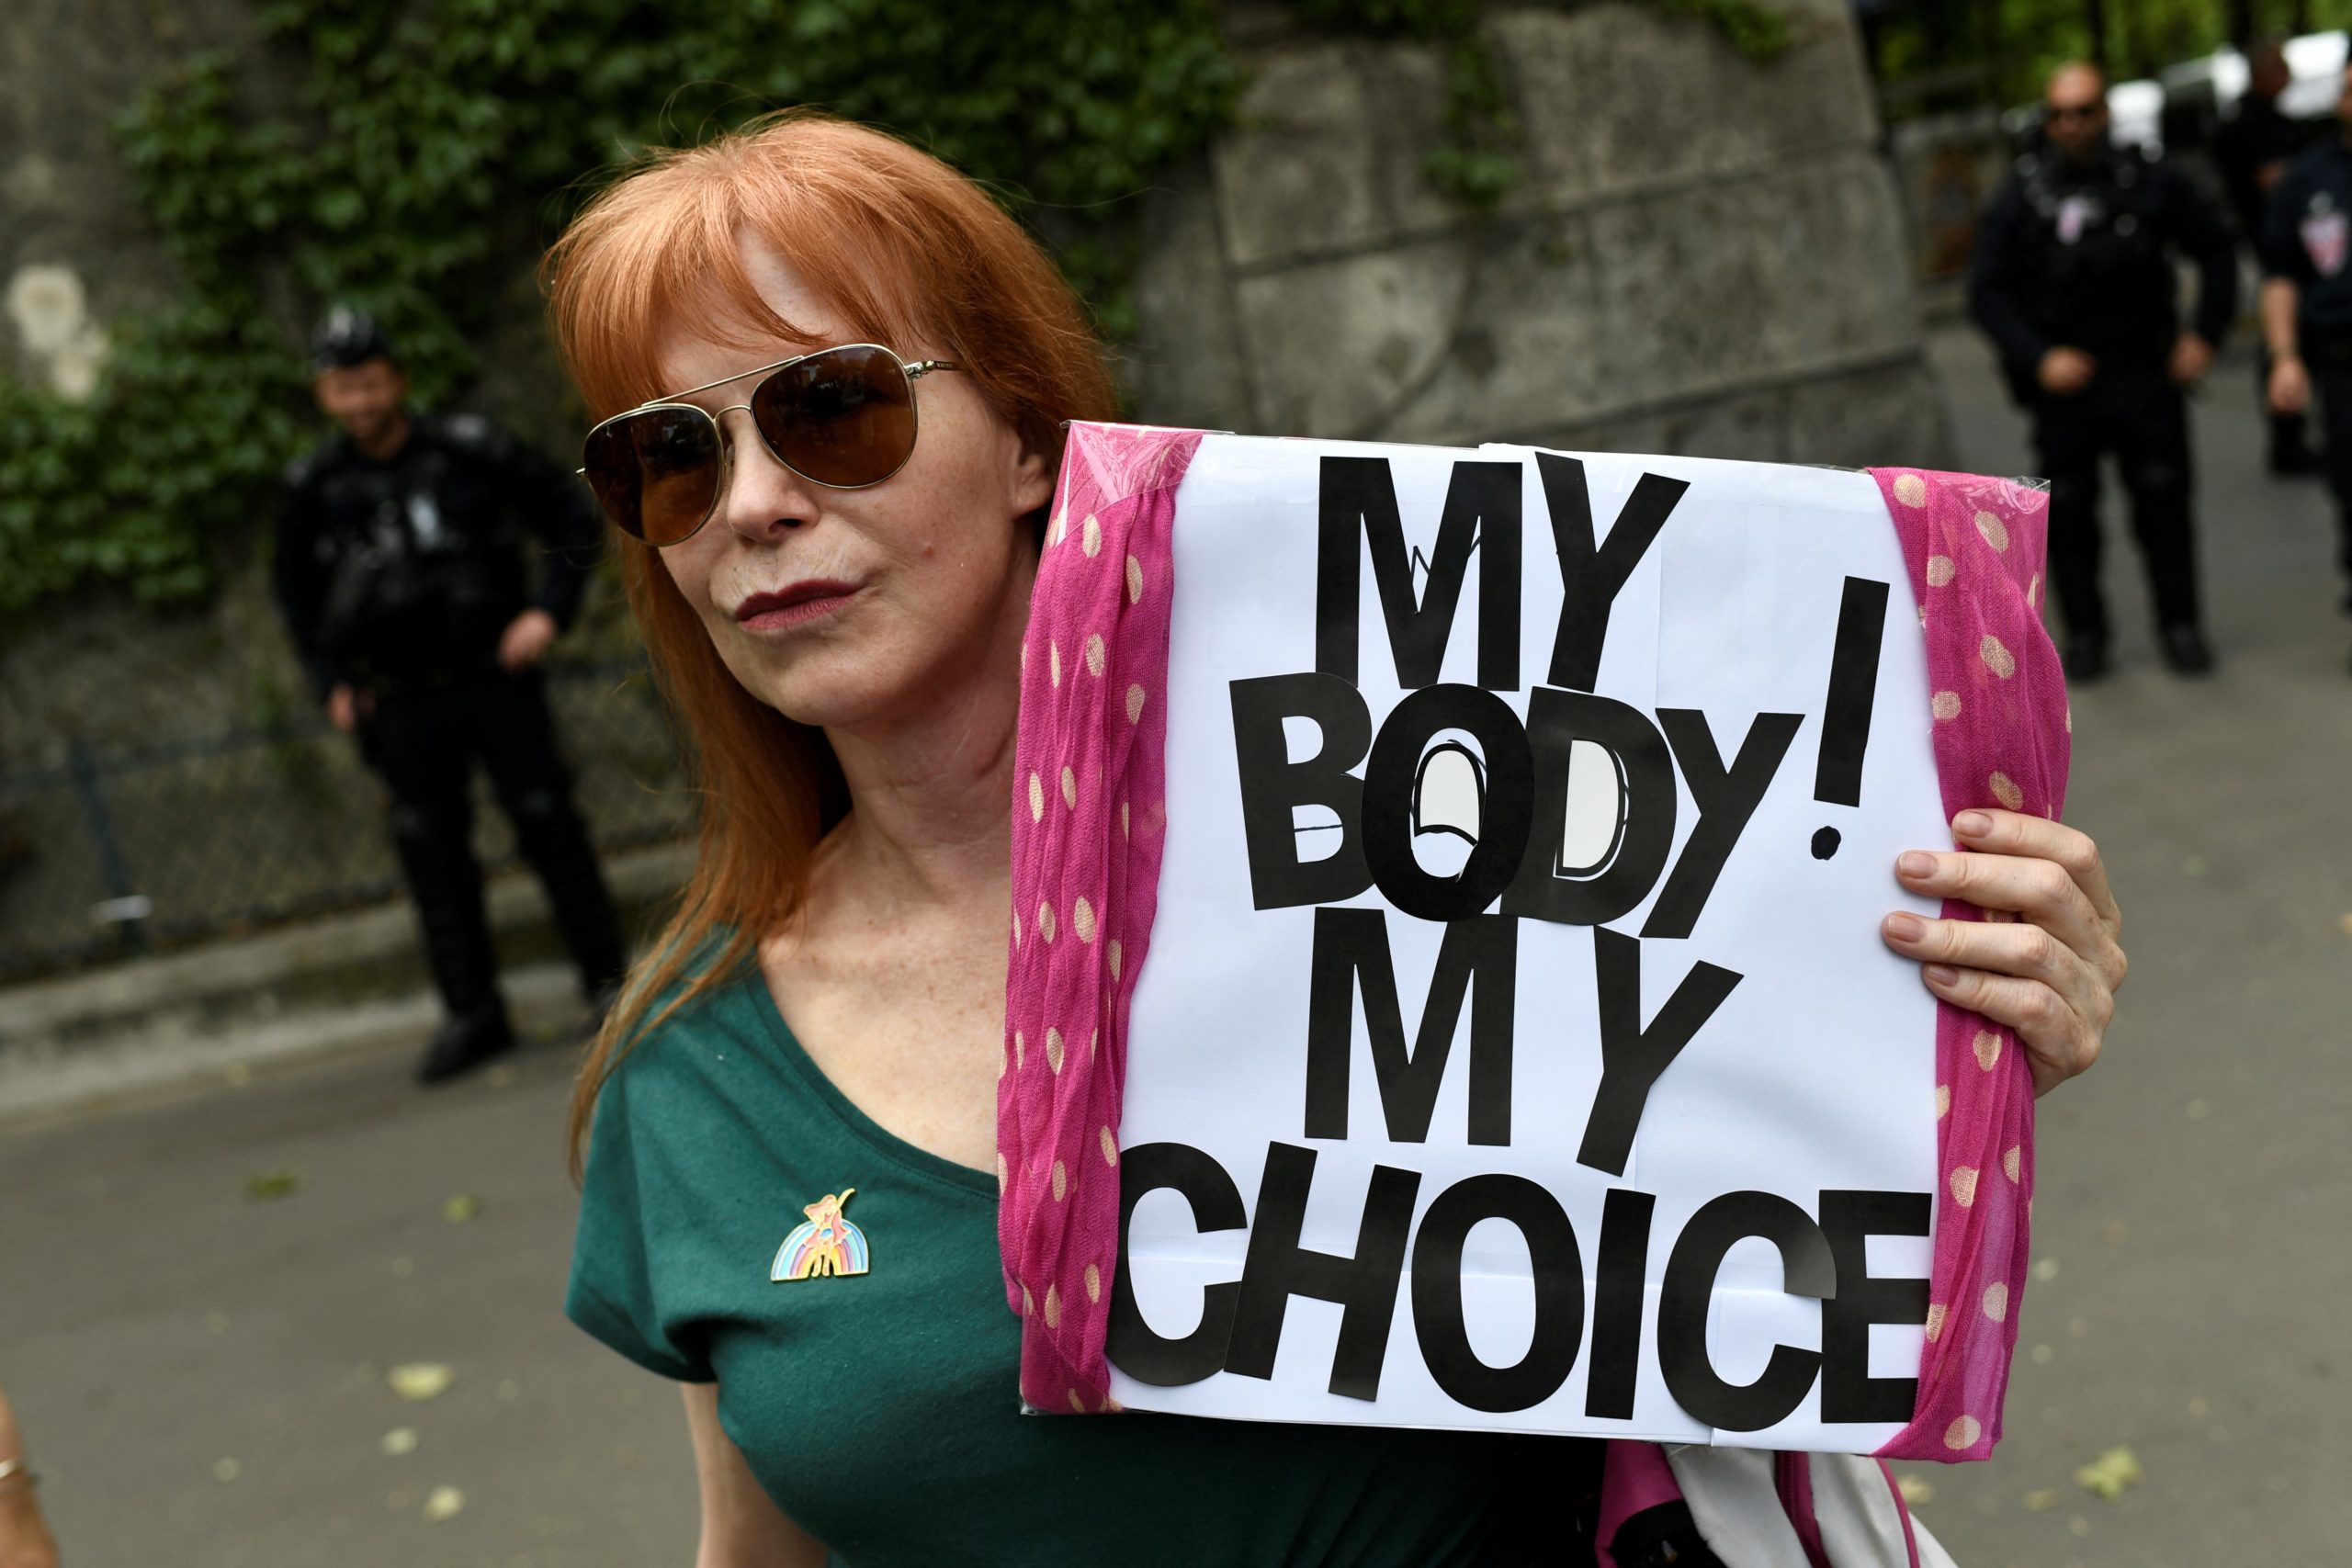 A woman takes part in a rally in support of abortion rights in the US in Paris, on May 15, 2022. - Thousands of activists took the streets across the United States in reaction to a leaked draft opinion showing the Supreme Court's conservative majority is poised to overturn Roe v. Wade, a landmark 1973 ruling guaranteeing abortion access nationwide. (Photo by STEPHANE DE SAKUTIN/AFP via Getty Images)